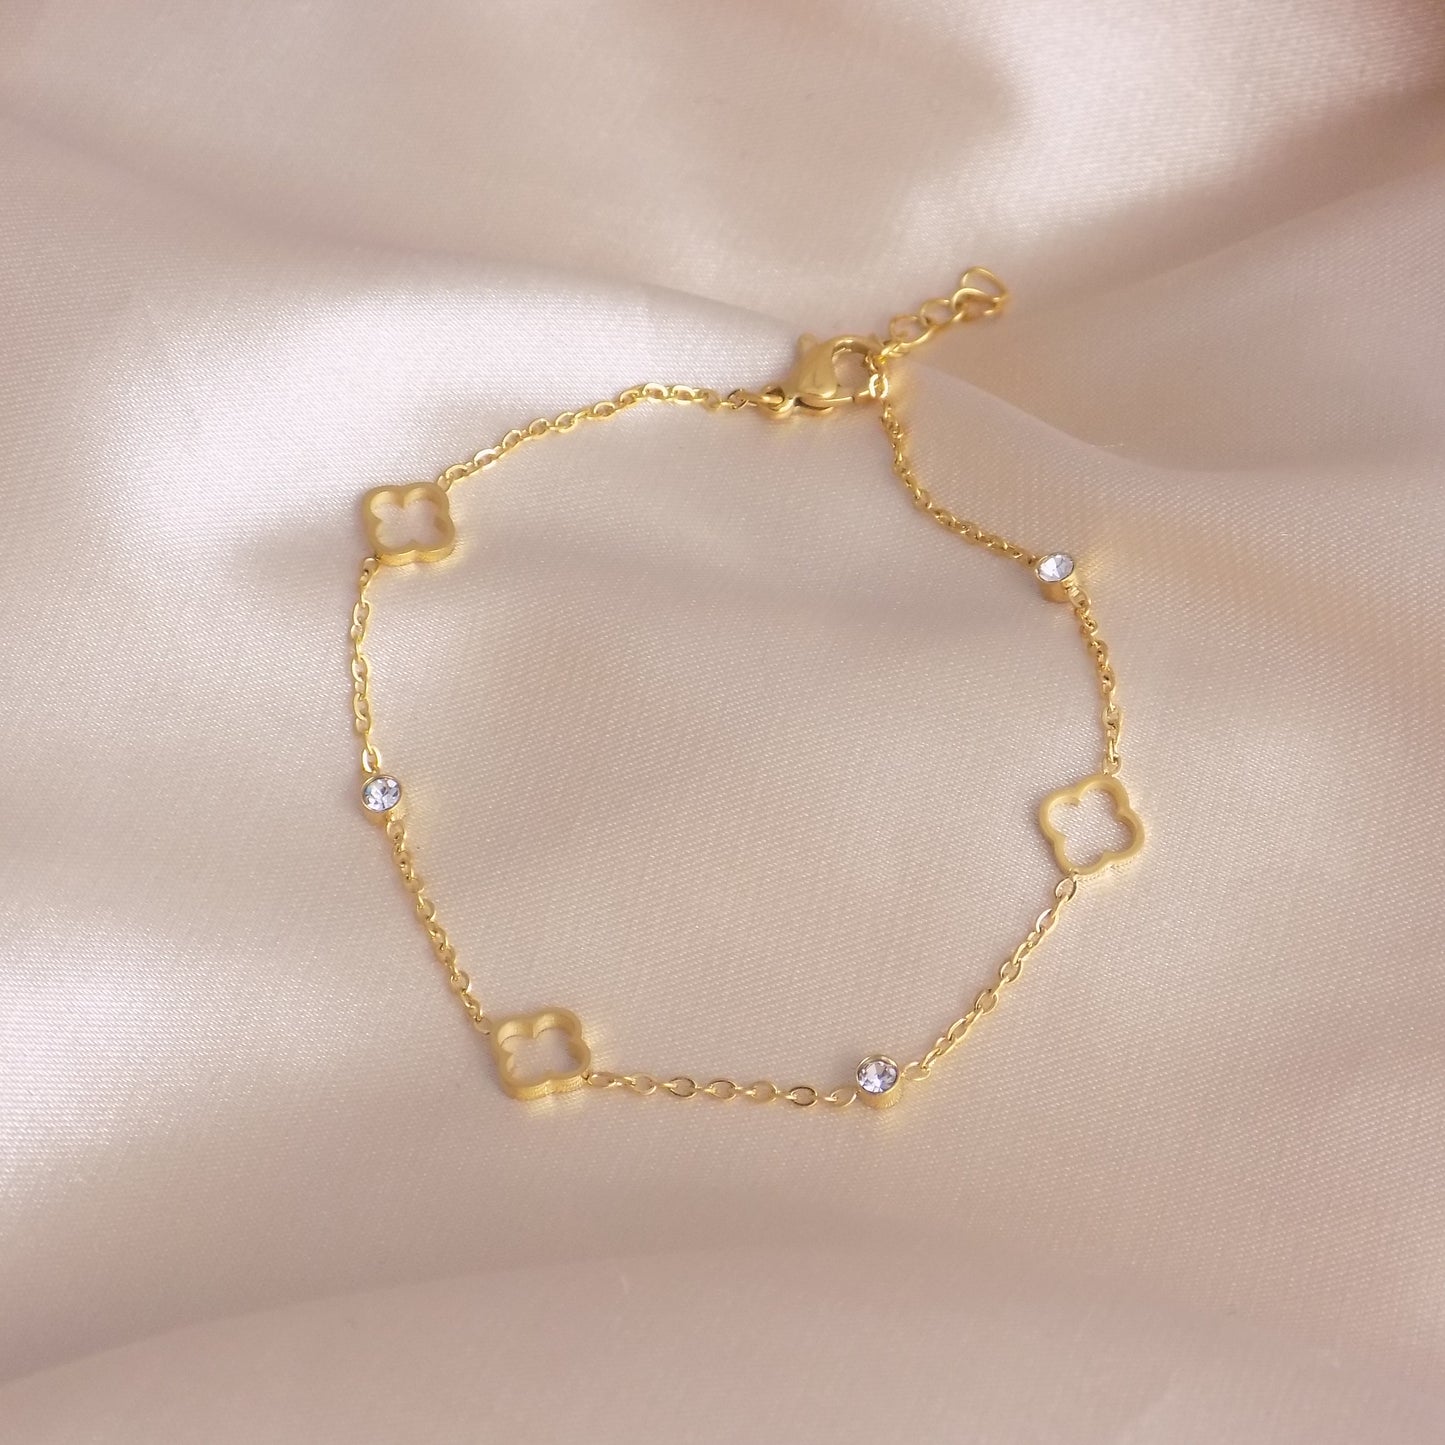 Dainty Gold Clover Bracelet with Cubic Zirconia Stones Adjustable Stainless Steel